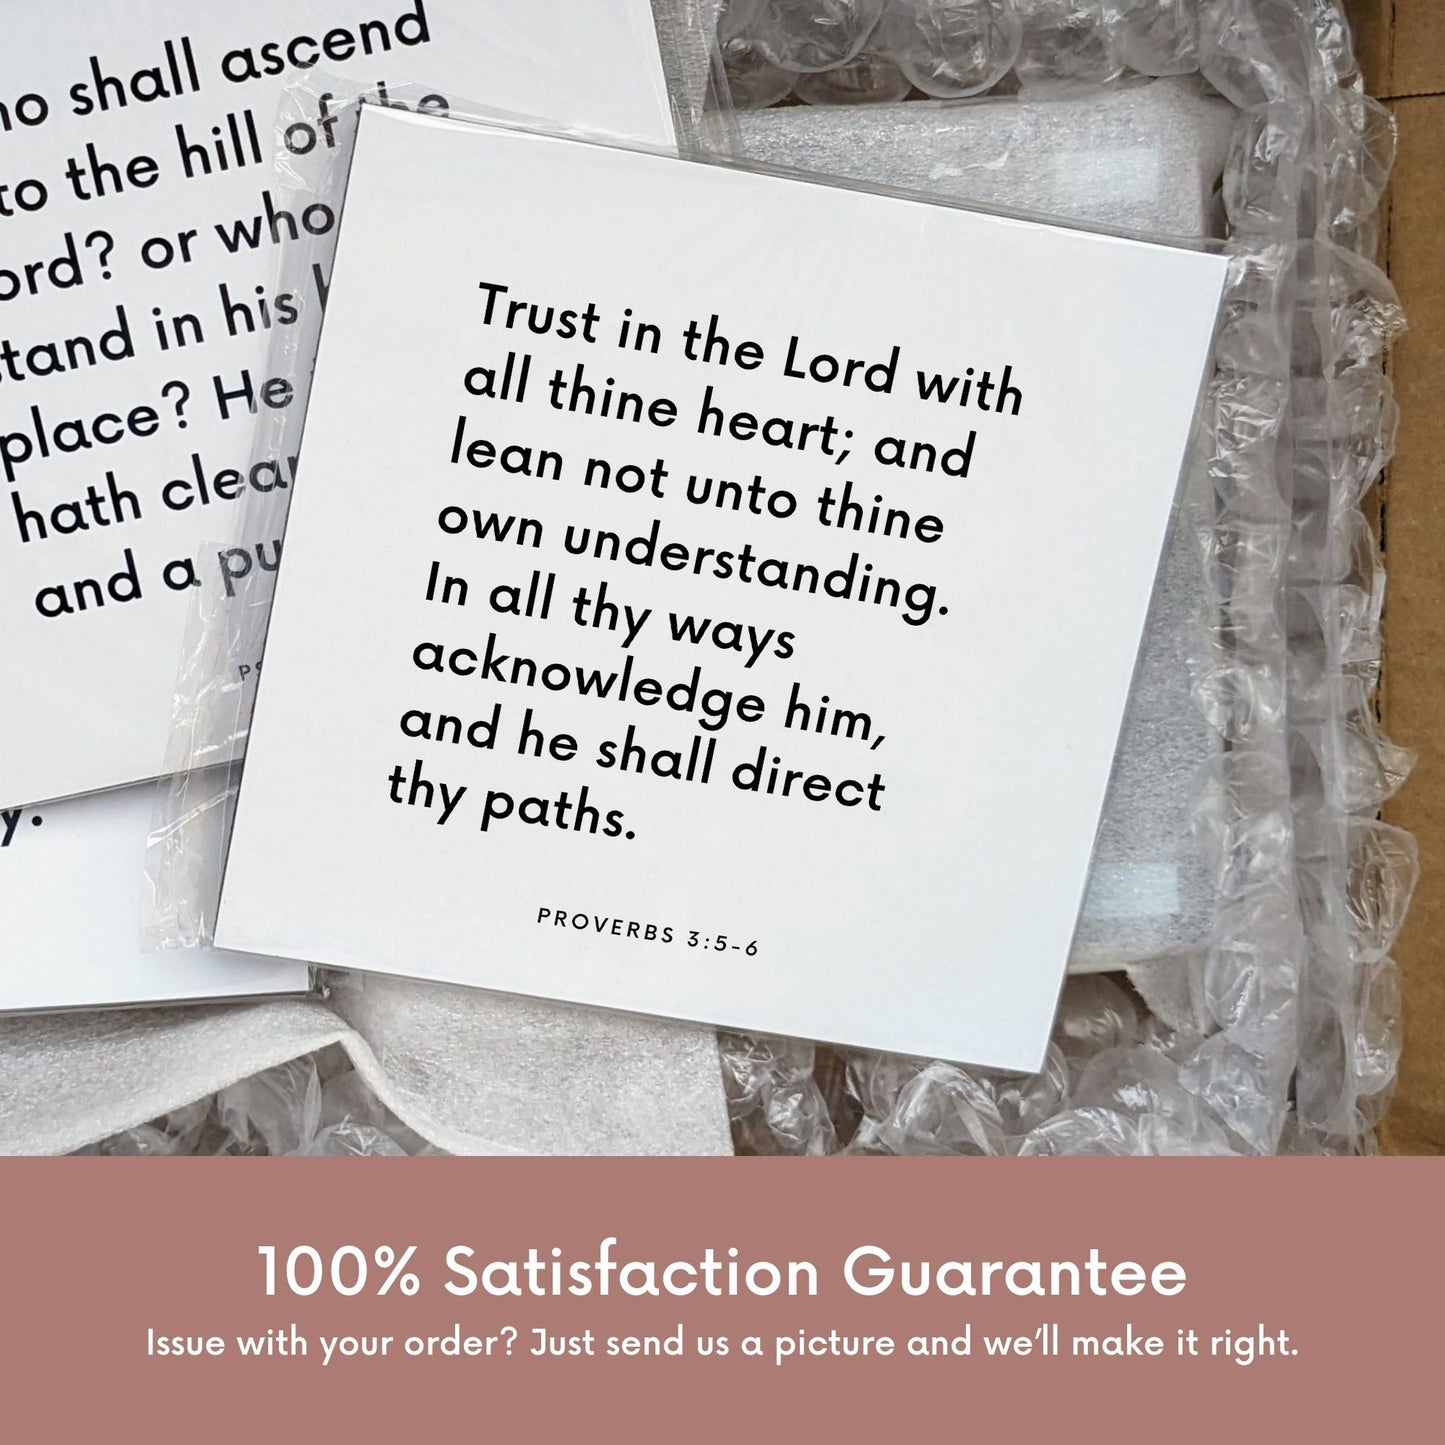 Shipping materials for scripture tile of Proverbs 3:5-6 - "Trust in the Lord with all thine heart"